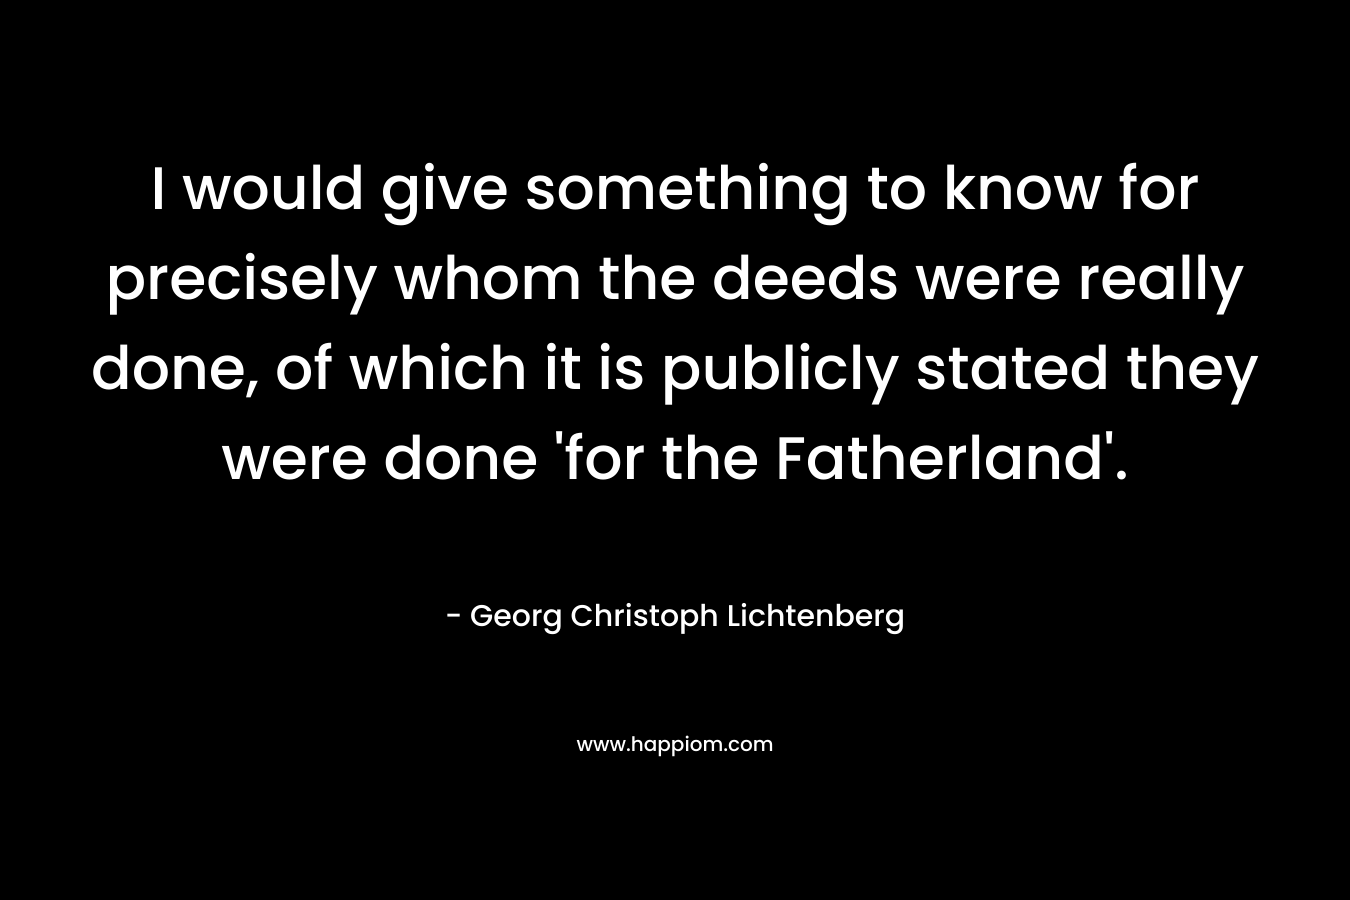 I would give something to know for precisely whom the deeds were really done, of which it is publicly stated they were done 'for the Fatherland'.